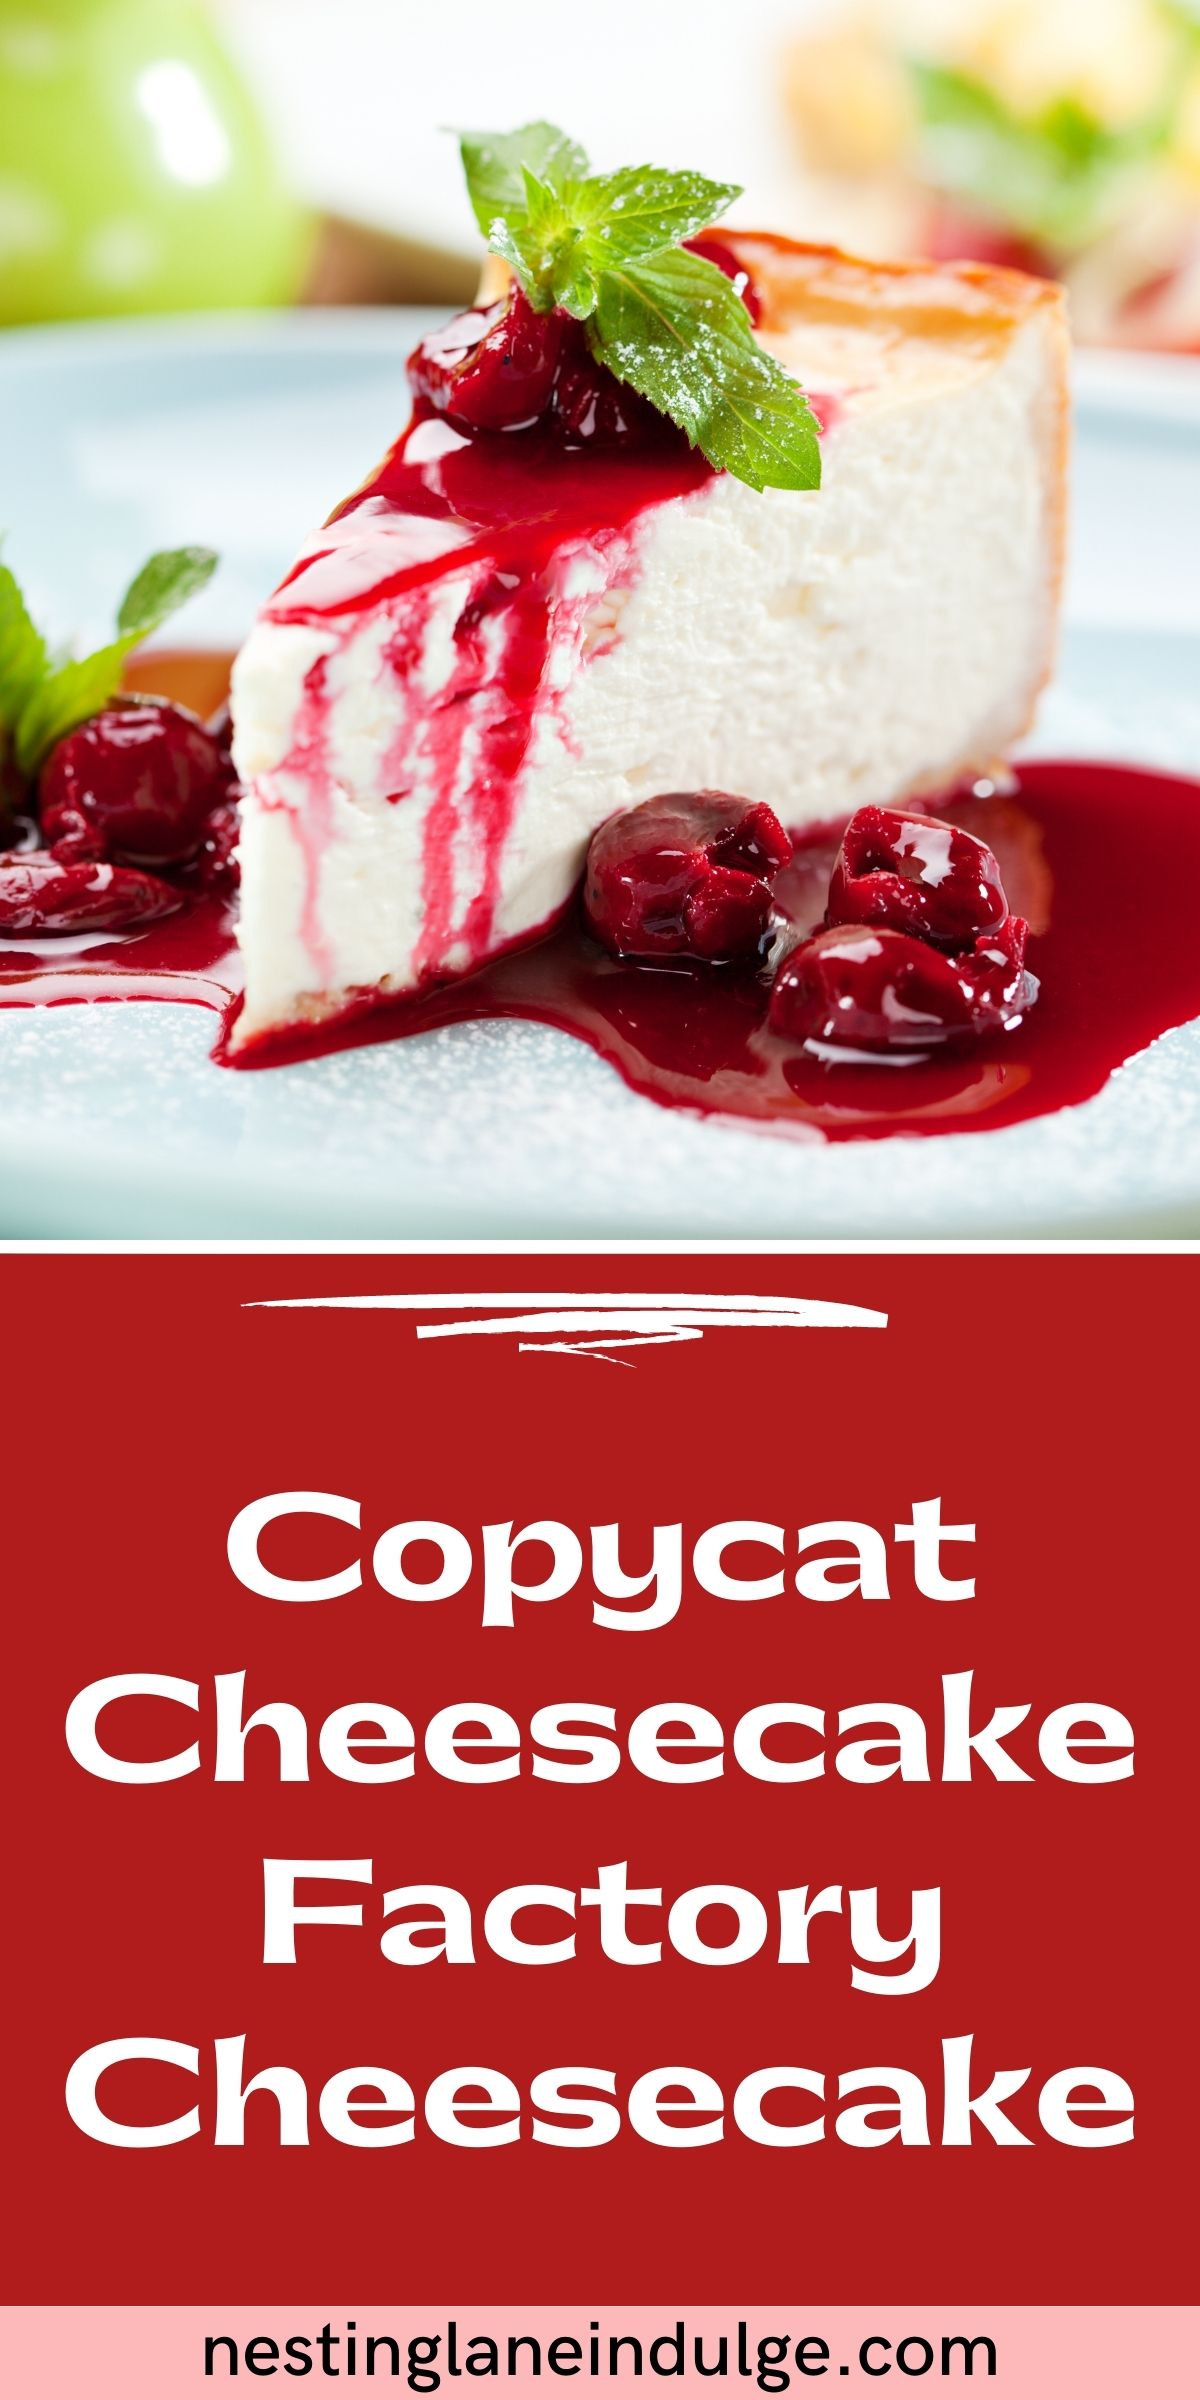 Graphic for Pinterest of Copycat Cheesecake Factory Cheesecake Recipe.